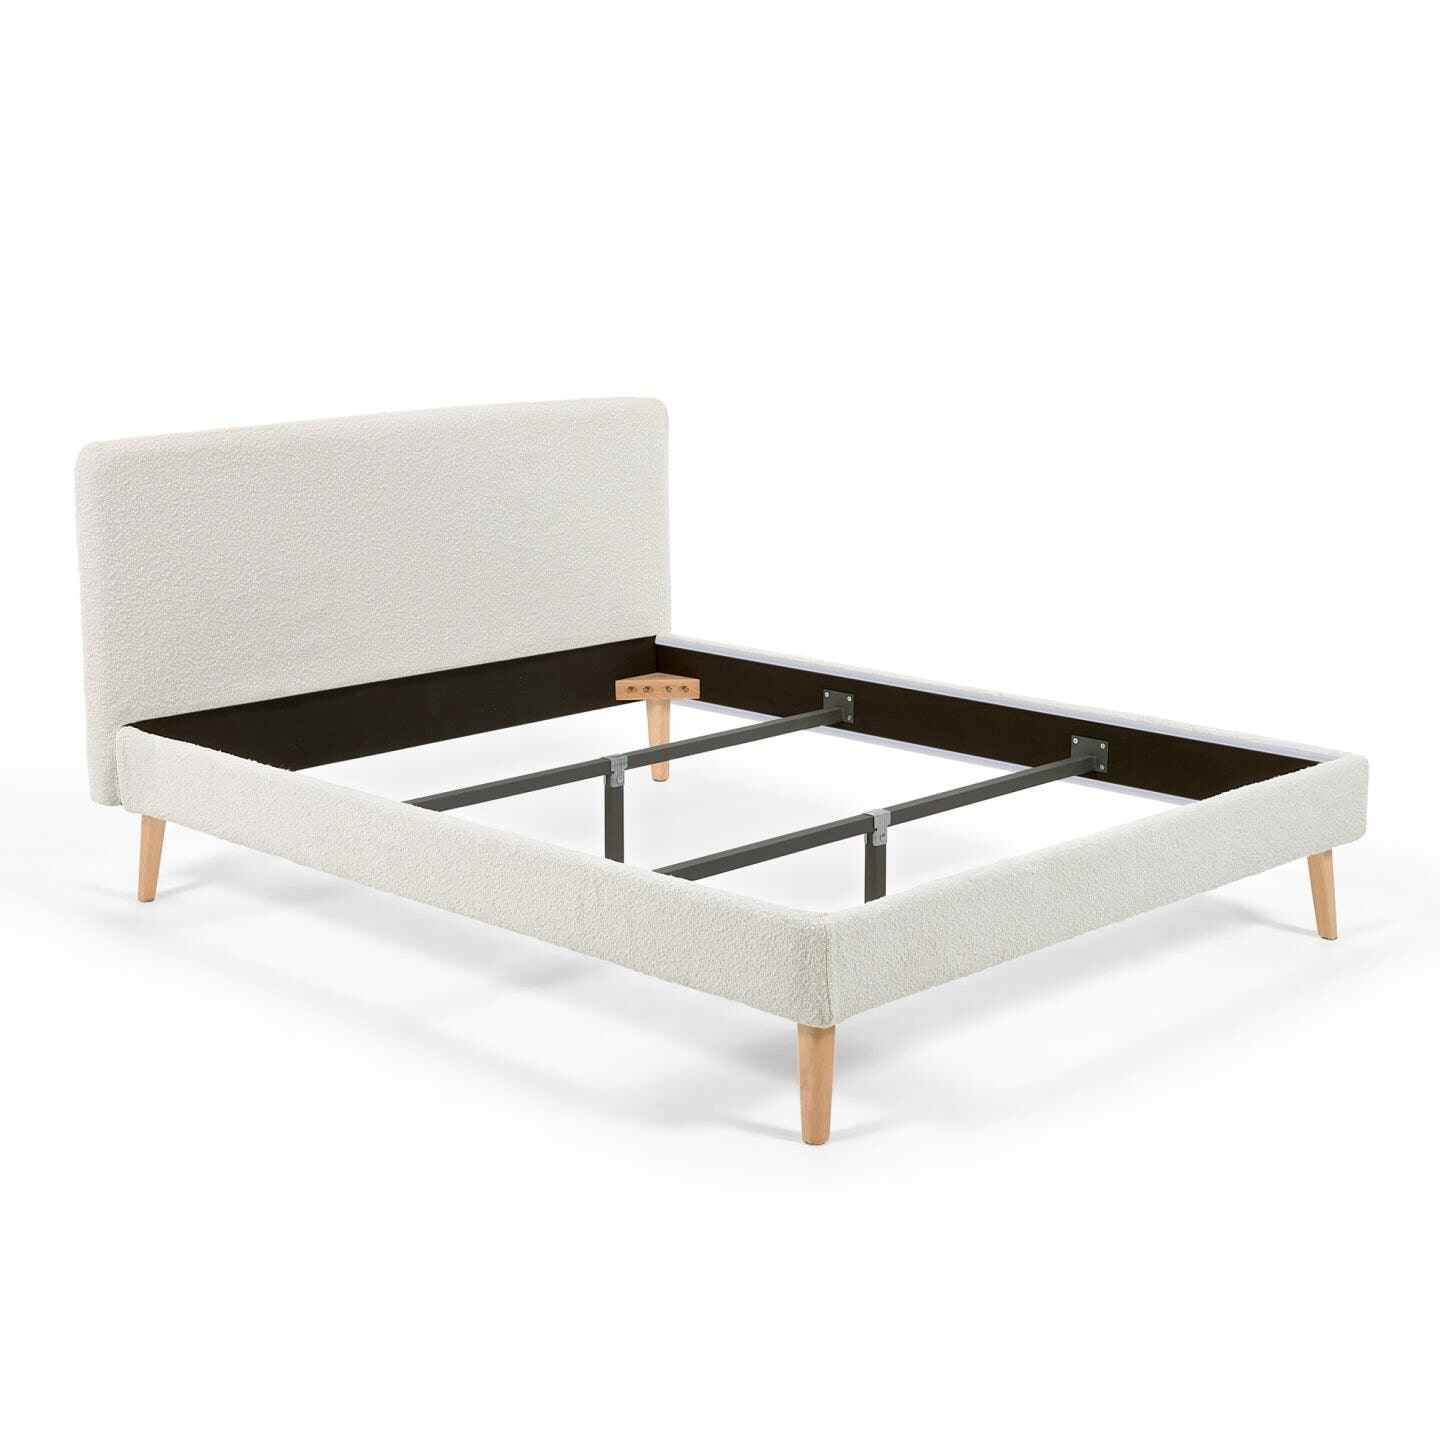 Kave Home Bed Dyla 160 x 200cm